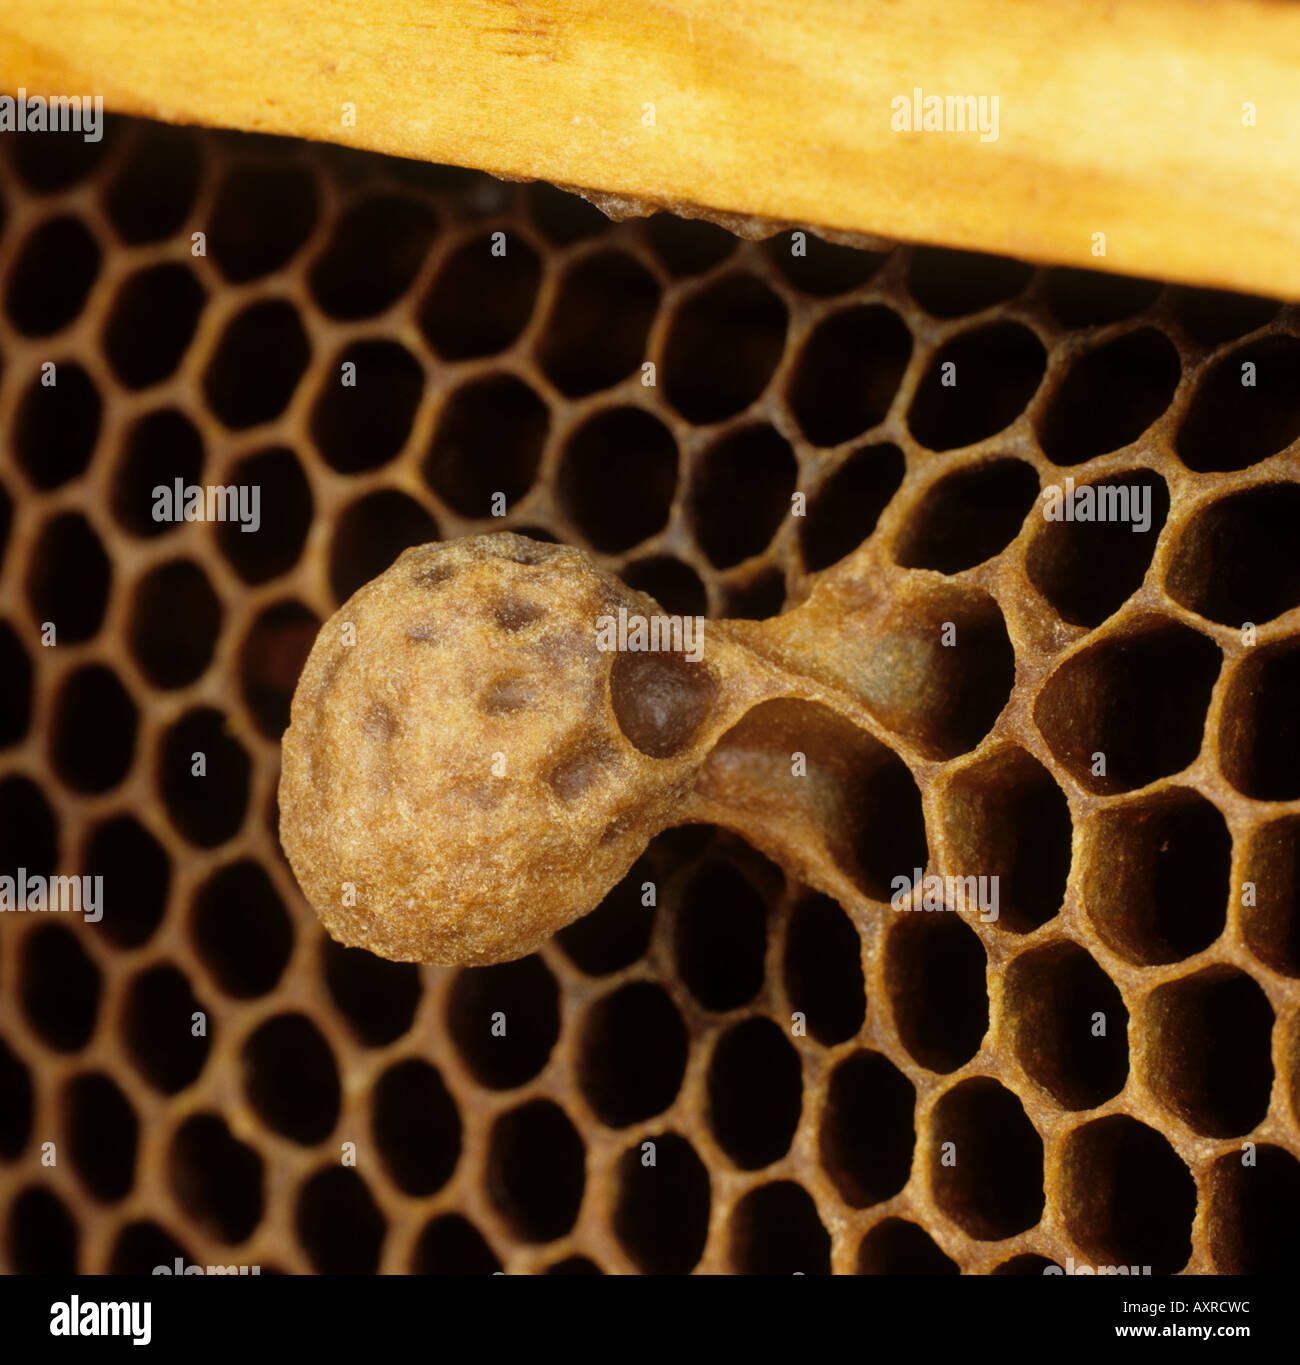 Honey bee Apis mellifera queen cell beginning to form on a honeycomb Stock Photo